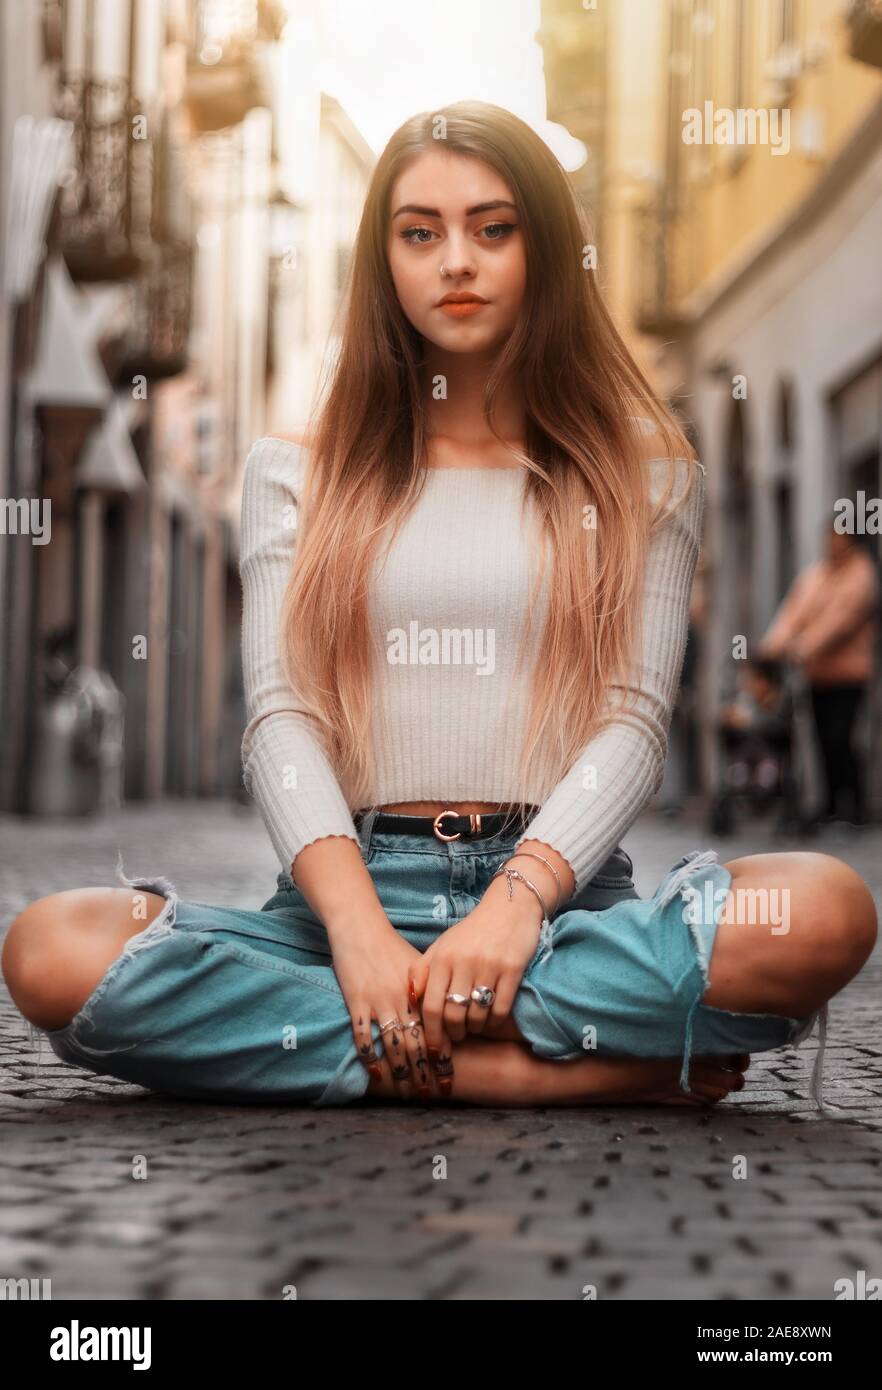 girl sitting on the ground in the street Stock Photo - Alamy